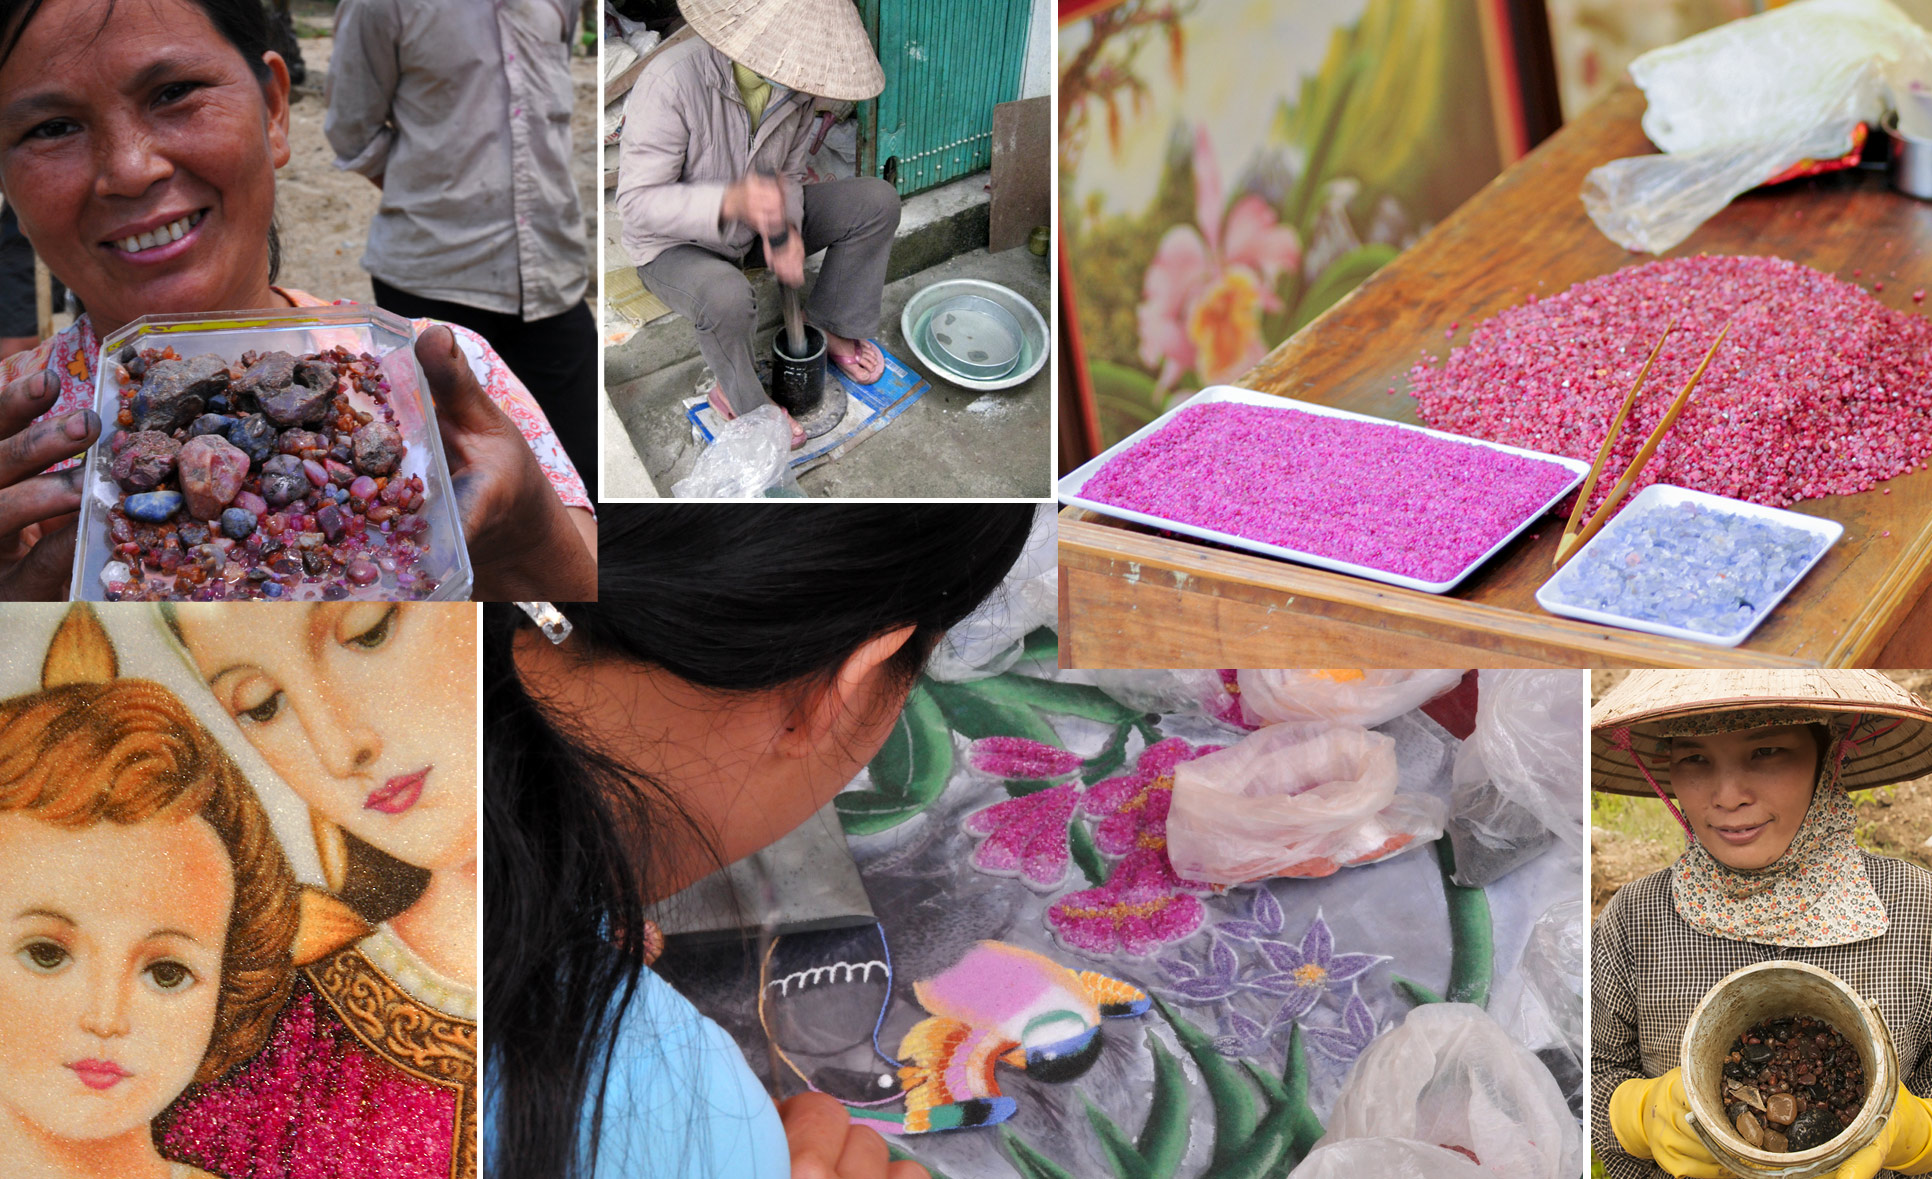 Gem painting is a vital part of the economy of gemstones in Vietnam and helps to support miners and their families